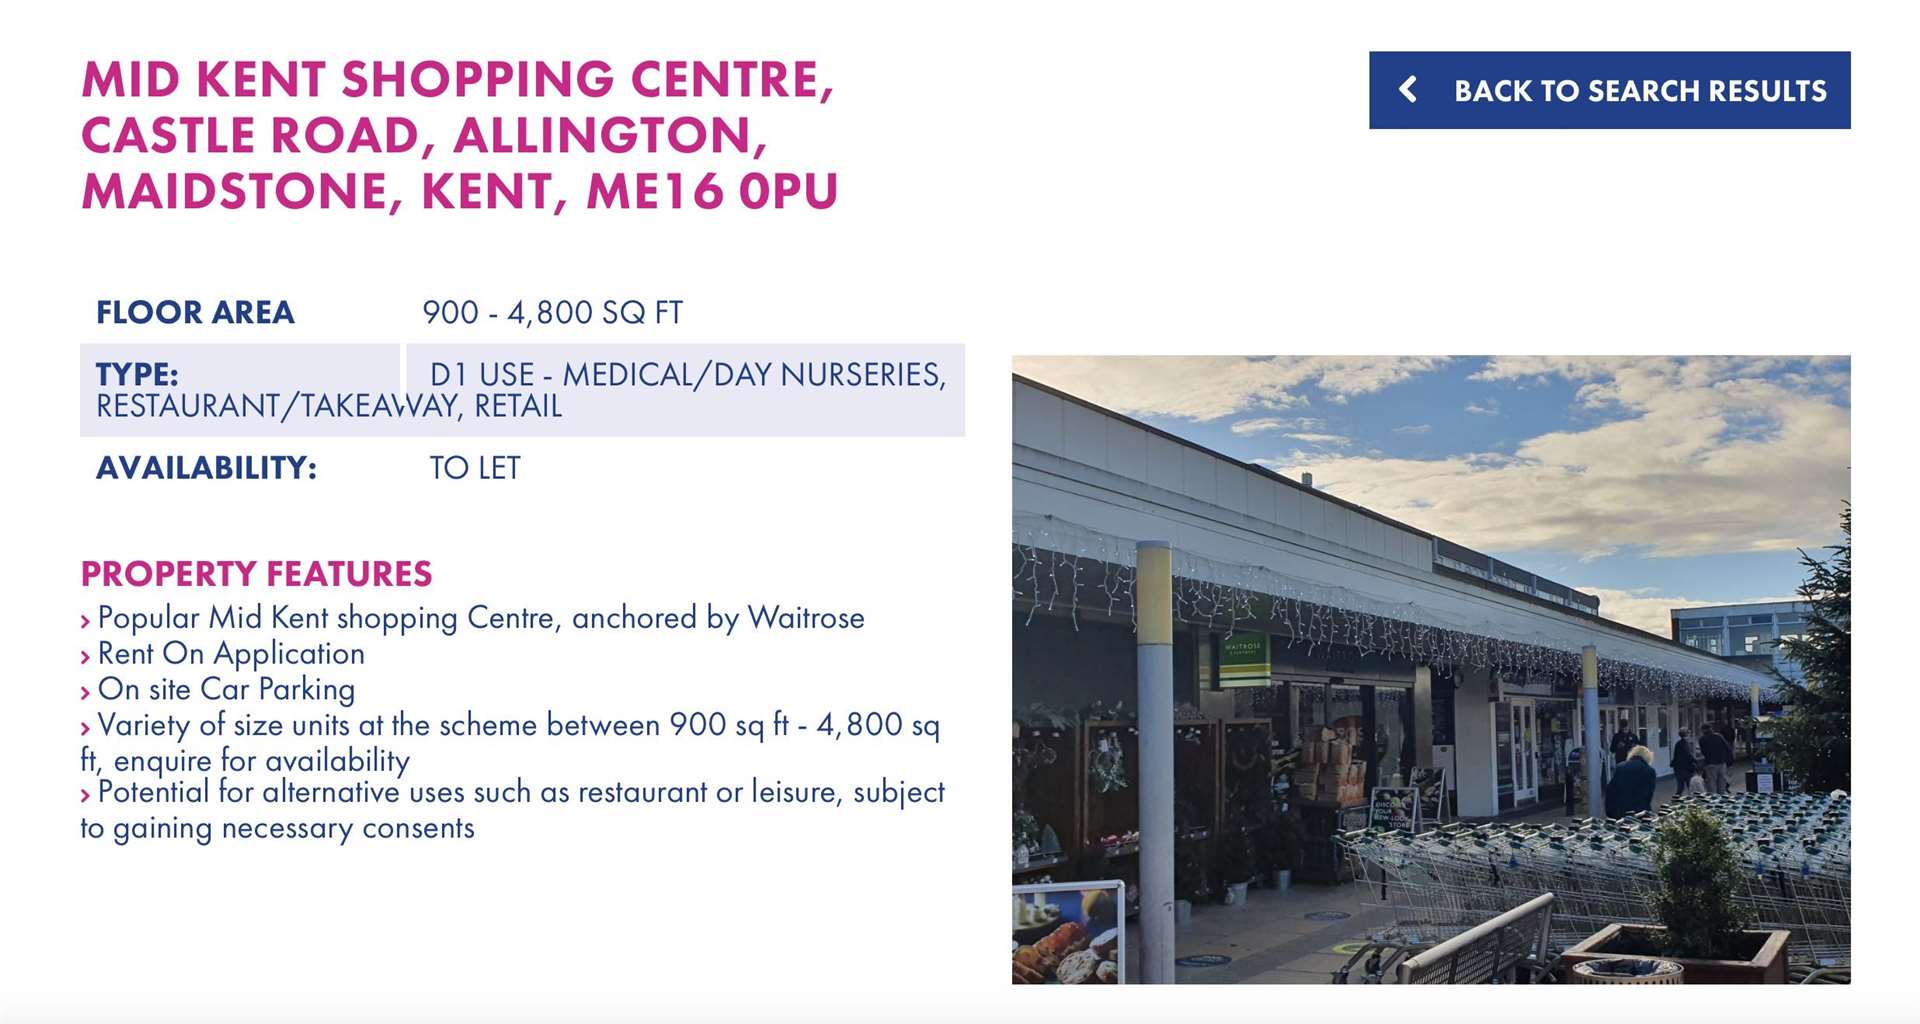 The listing was published by Sibley Pares and shows the shopping centre up for rent